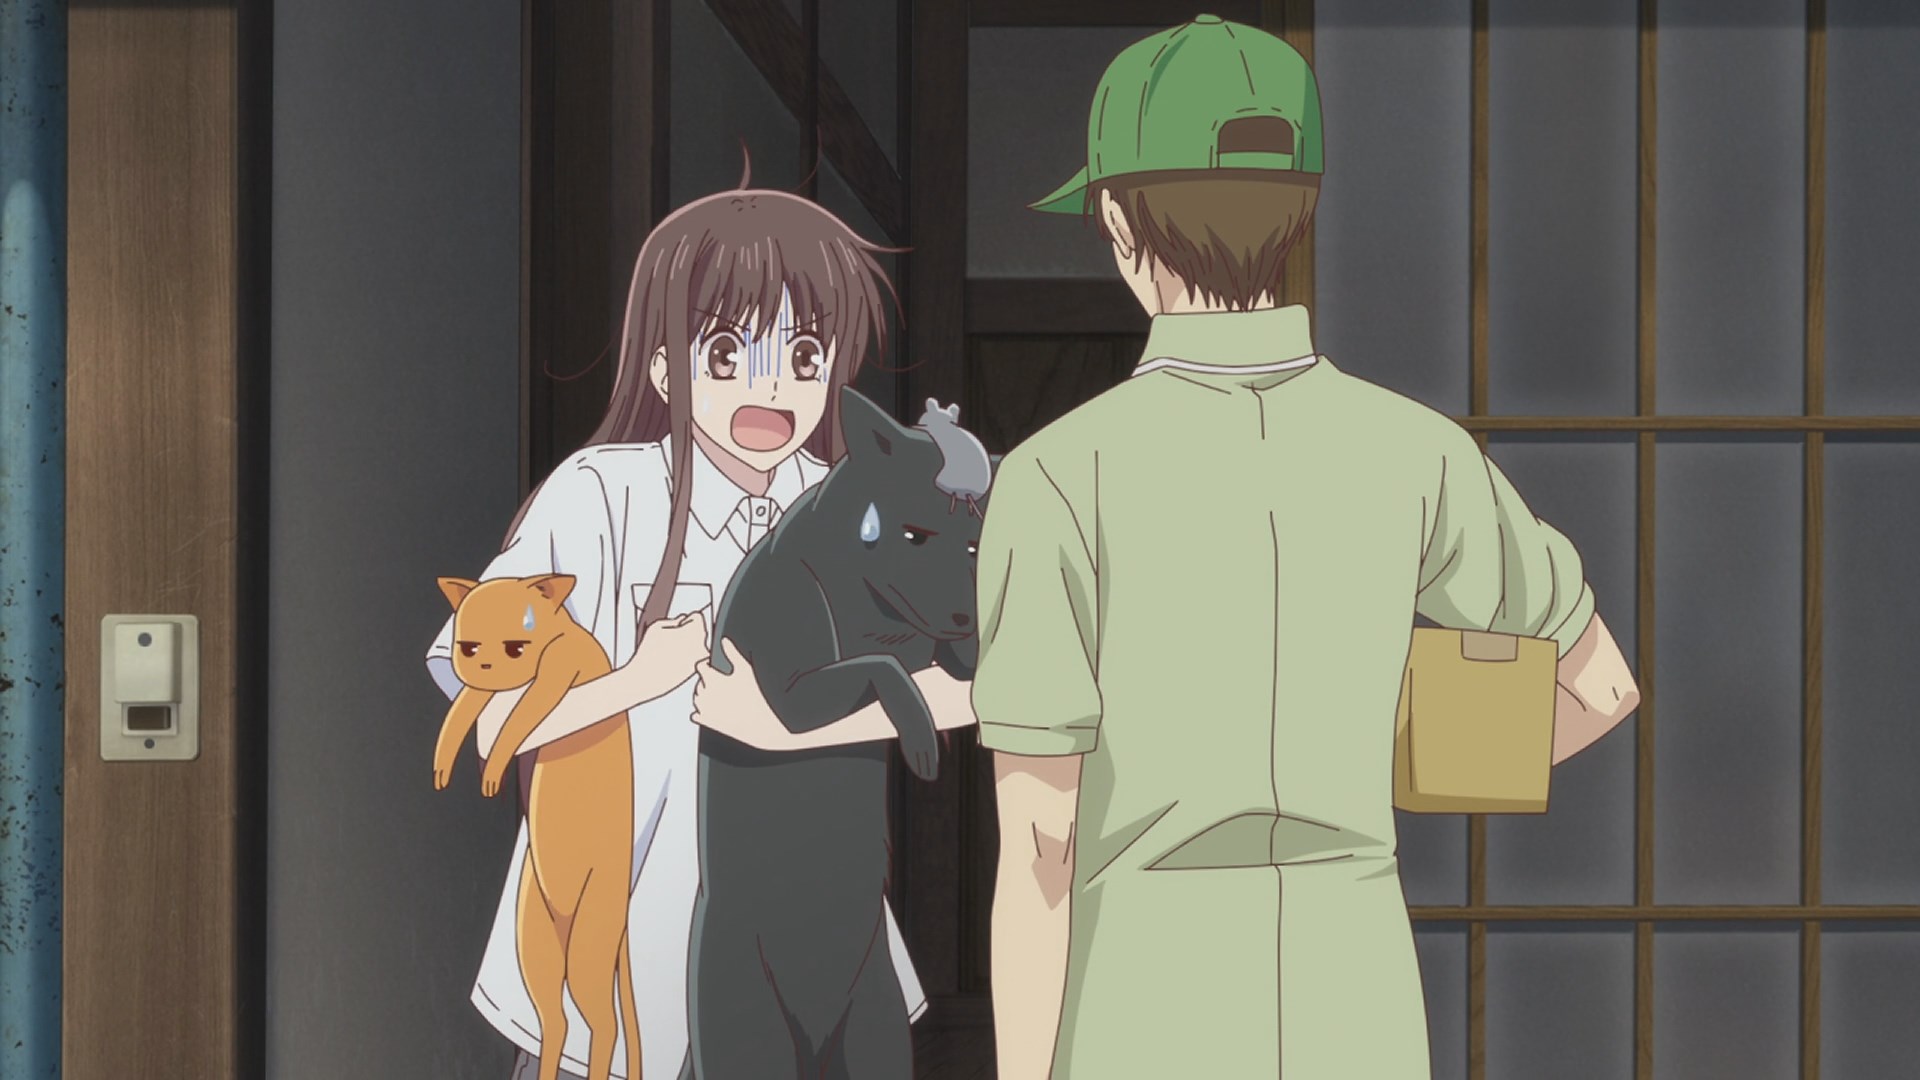 Fruits Basket (2019) – 18 - Lost in Anime